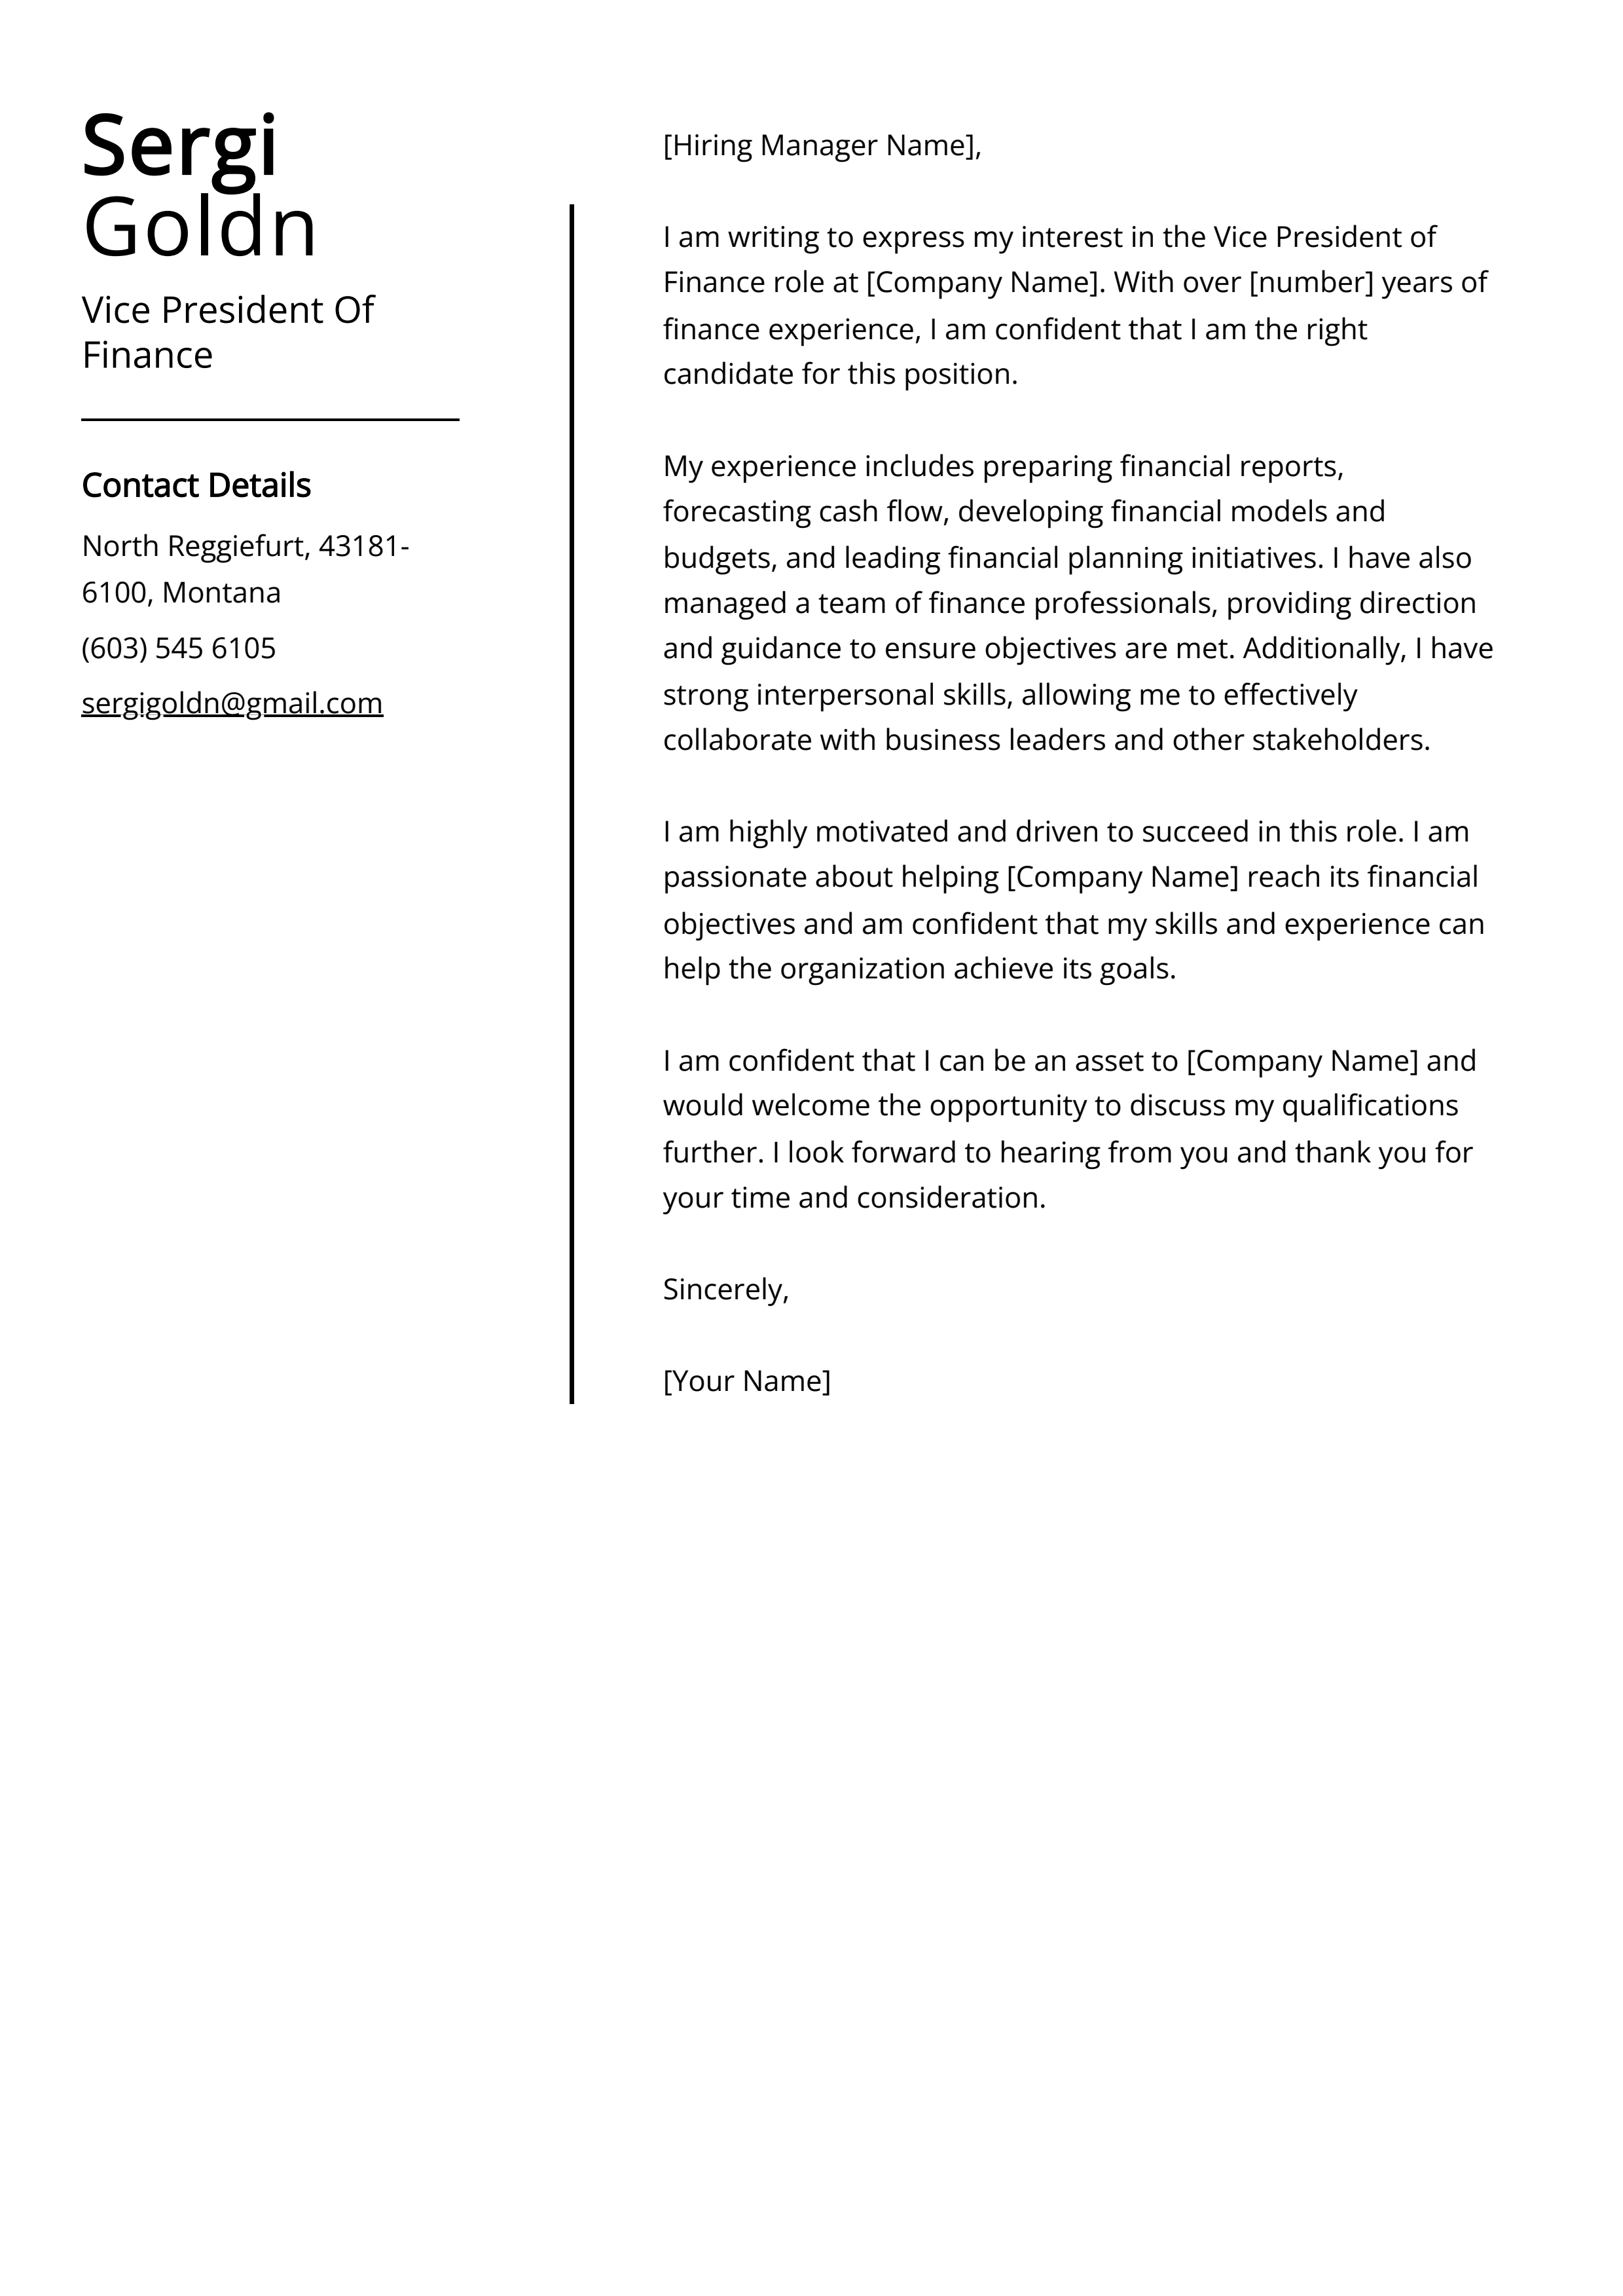 Vice President Of Finance Cover Letter Example